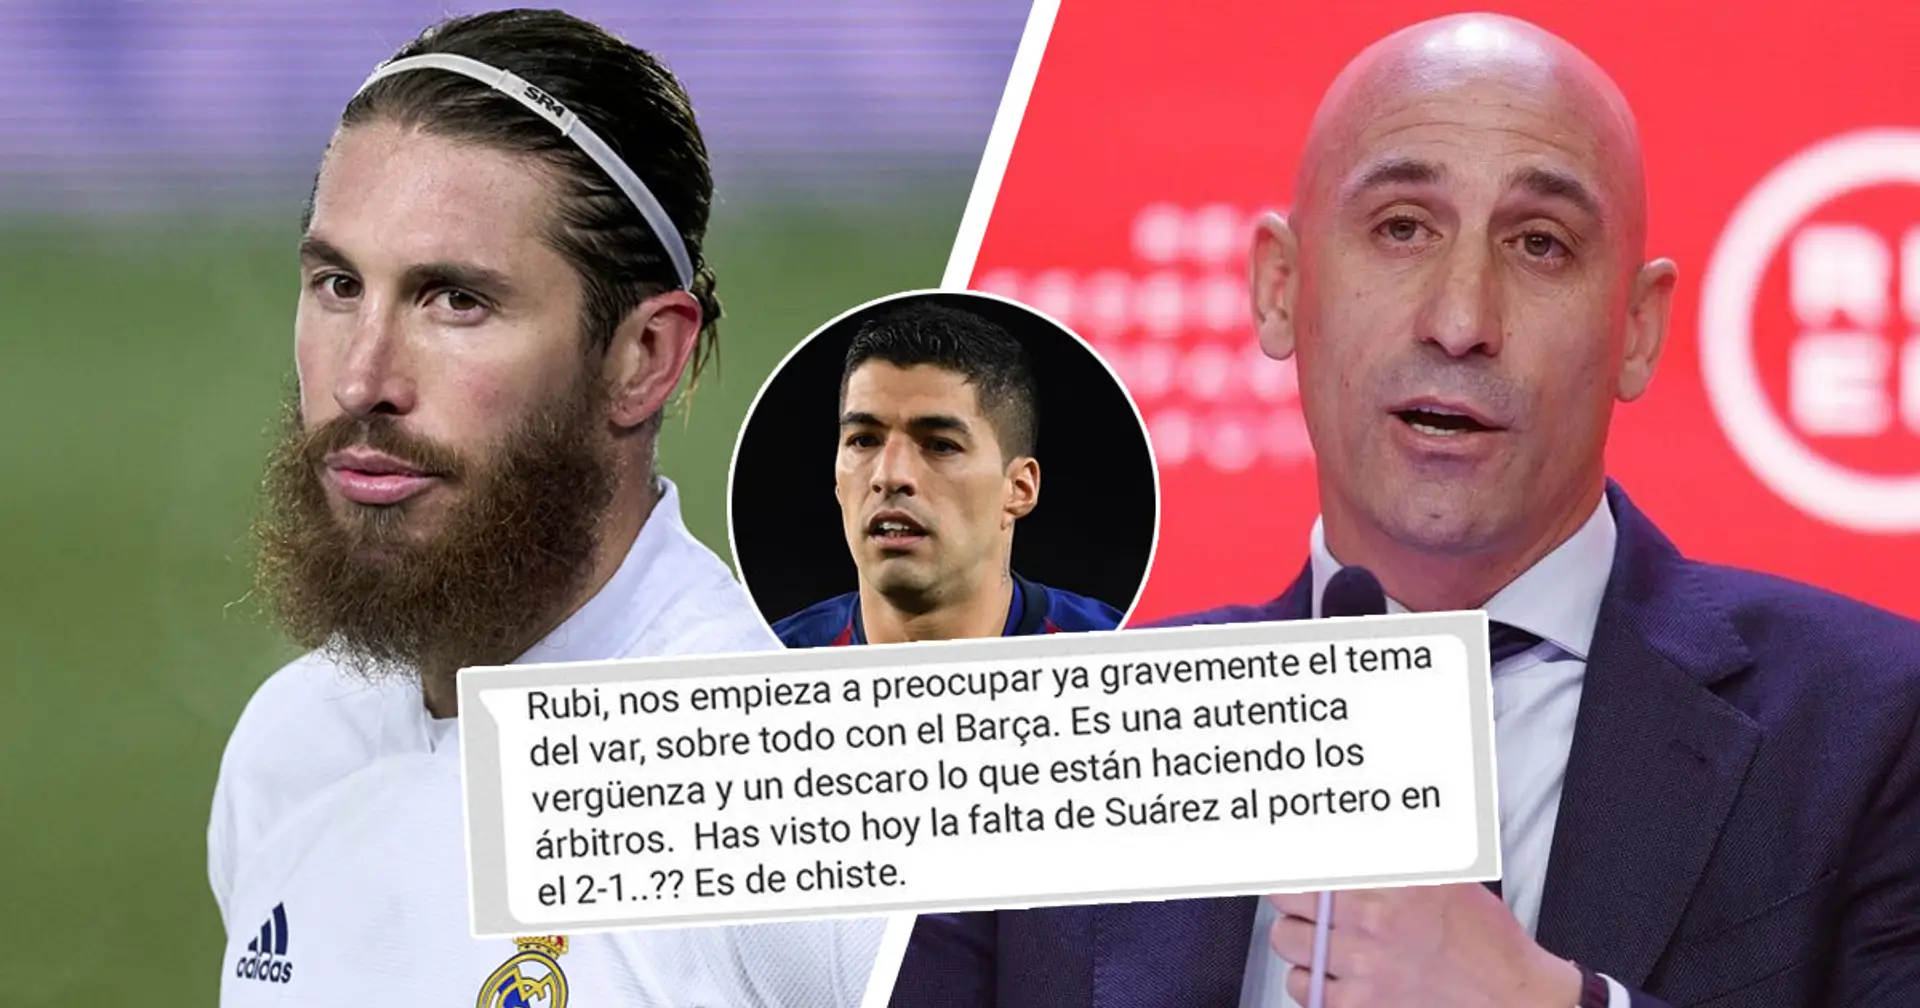 'It's a real shame': Leaked messages show Sergio Ramos complaining over VAR in Barca games to FA president